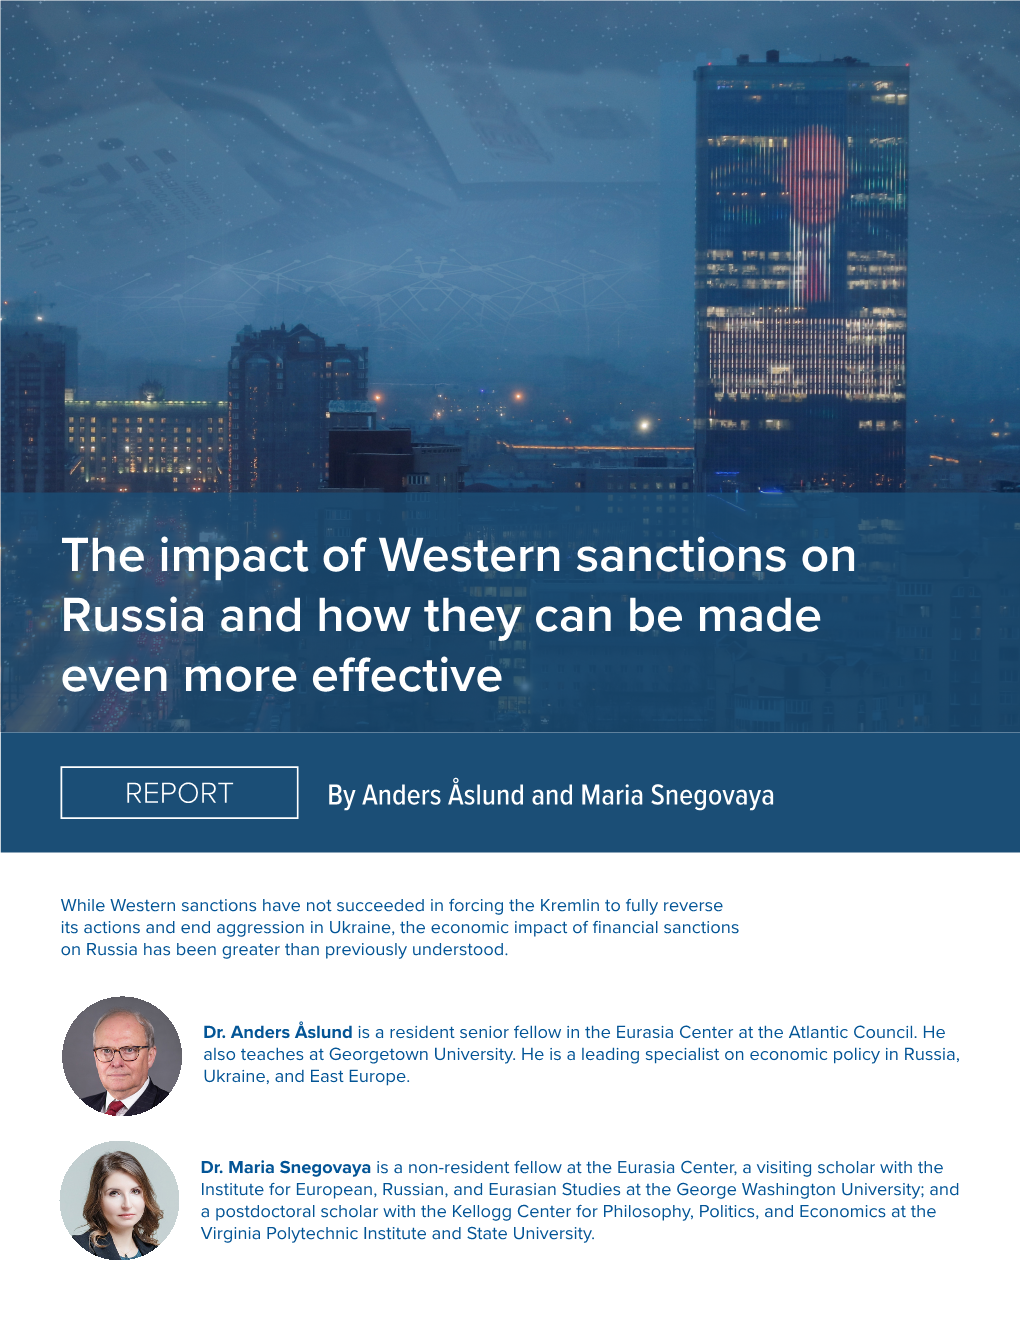 The Impact of Western Sanctions on Russia and How They Can Be Made Even More Effective